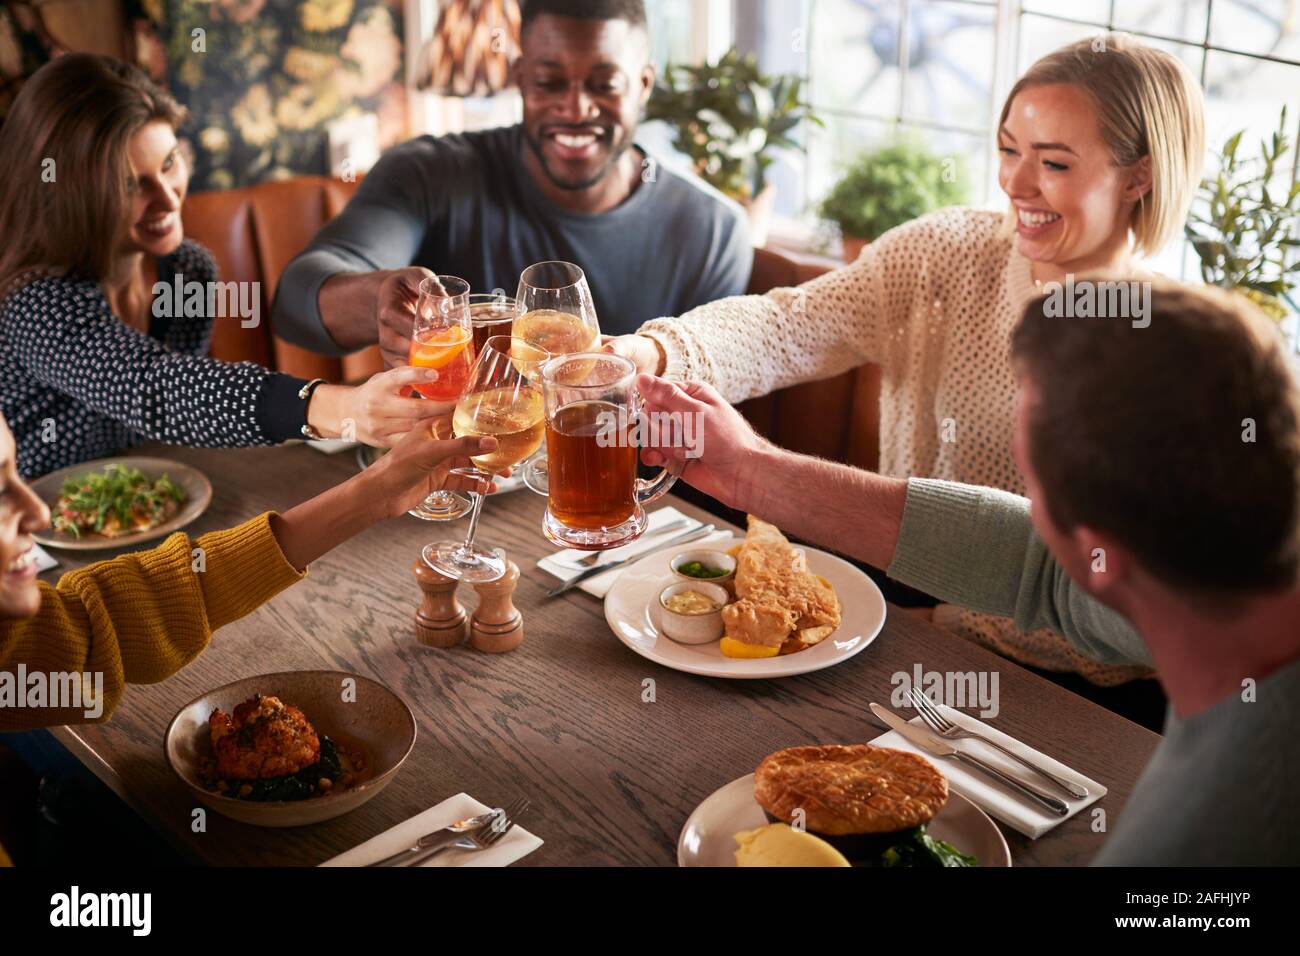 Friends Meeting For Meal In Traditional English Pub Making Toast Together Stock Photo